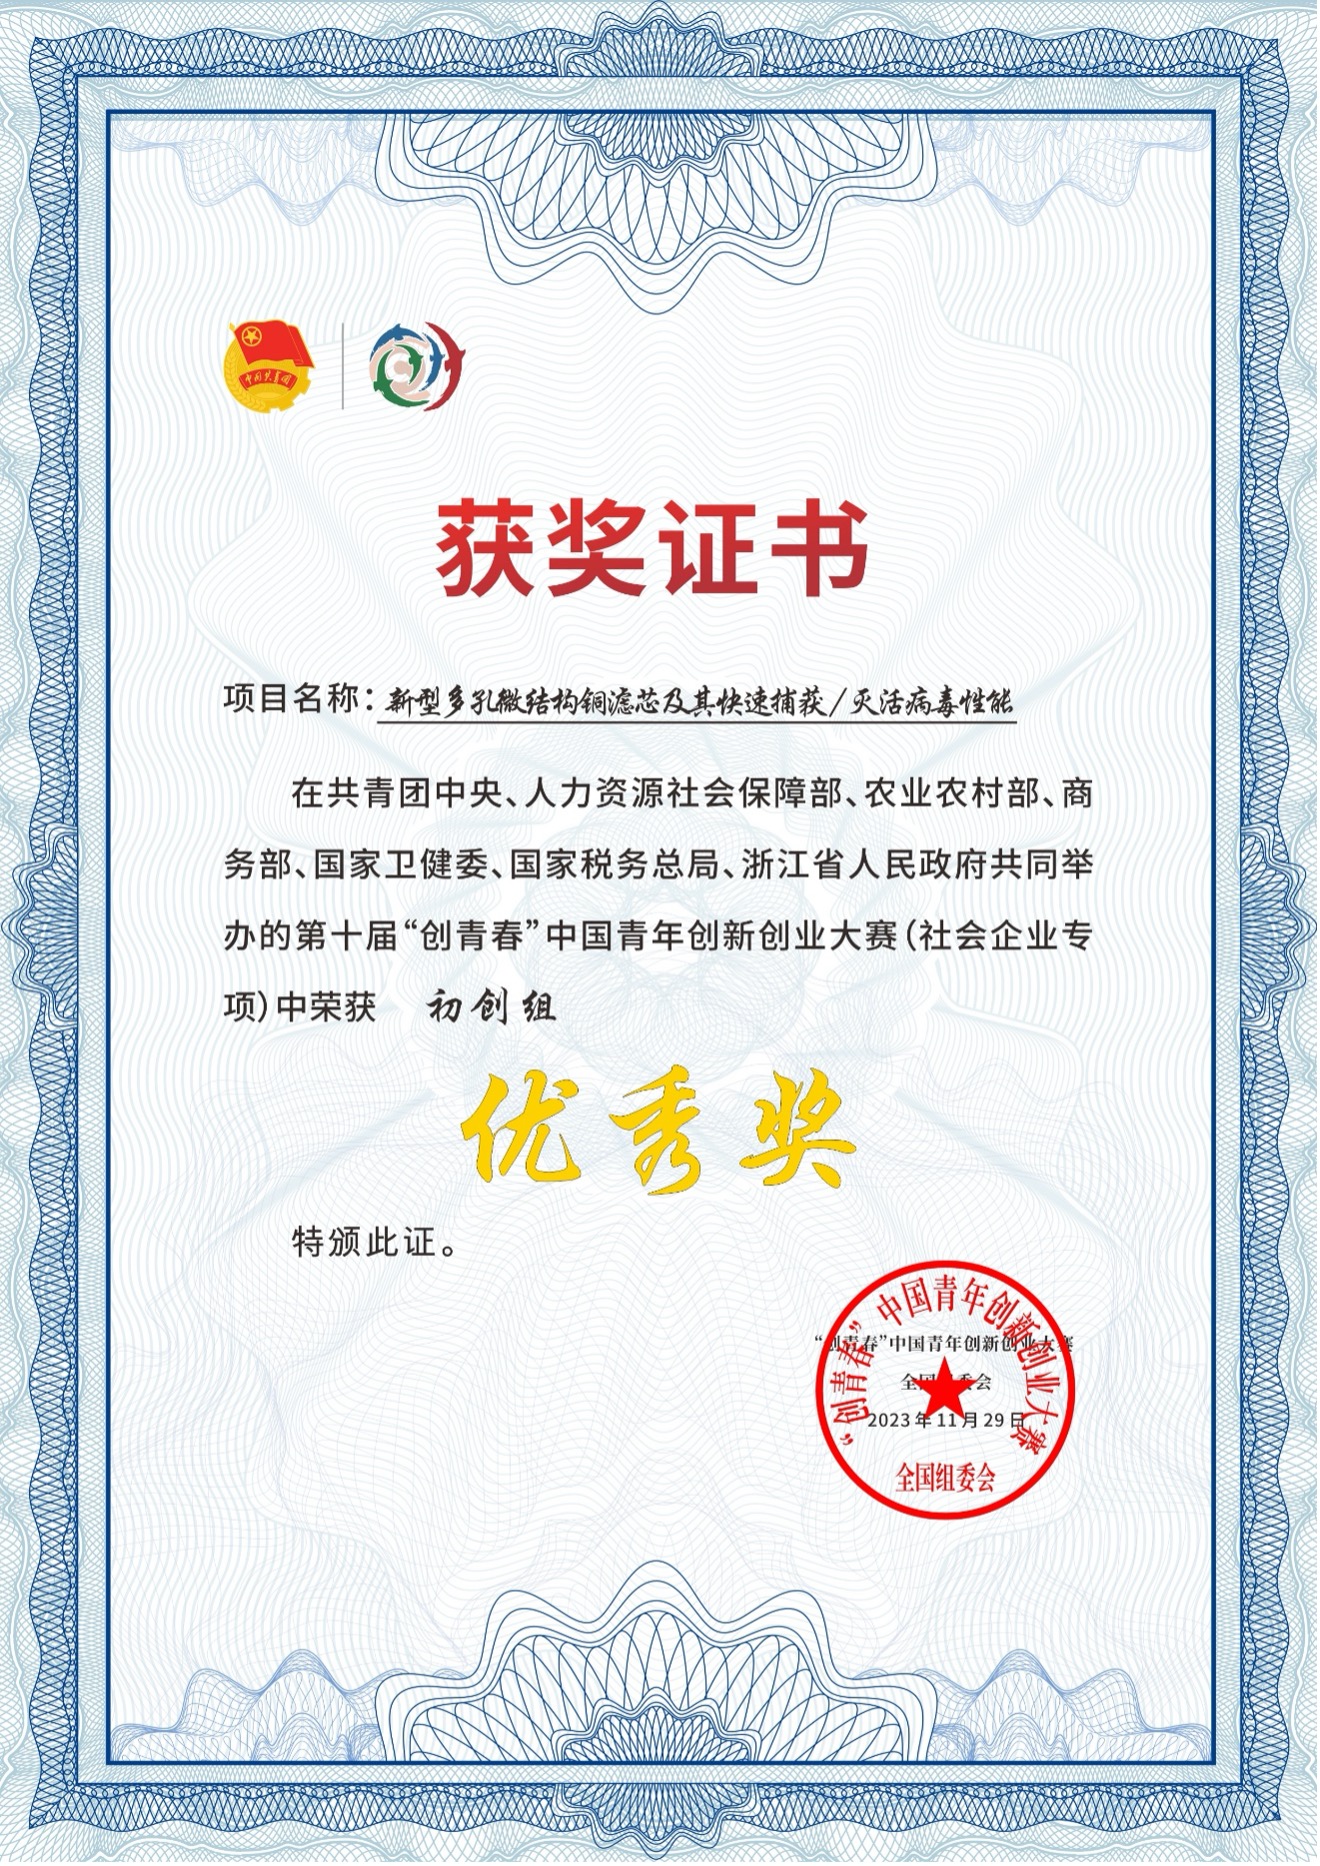 10th China College Students' Entrepreneurship Competition